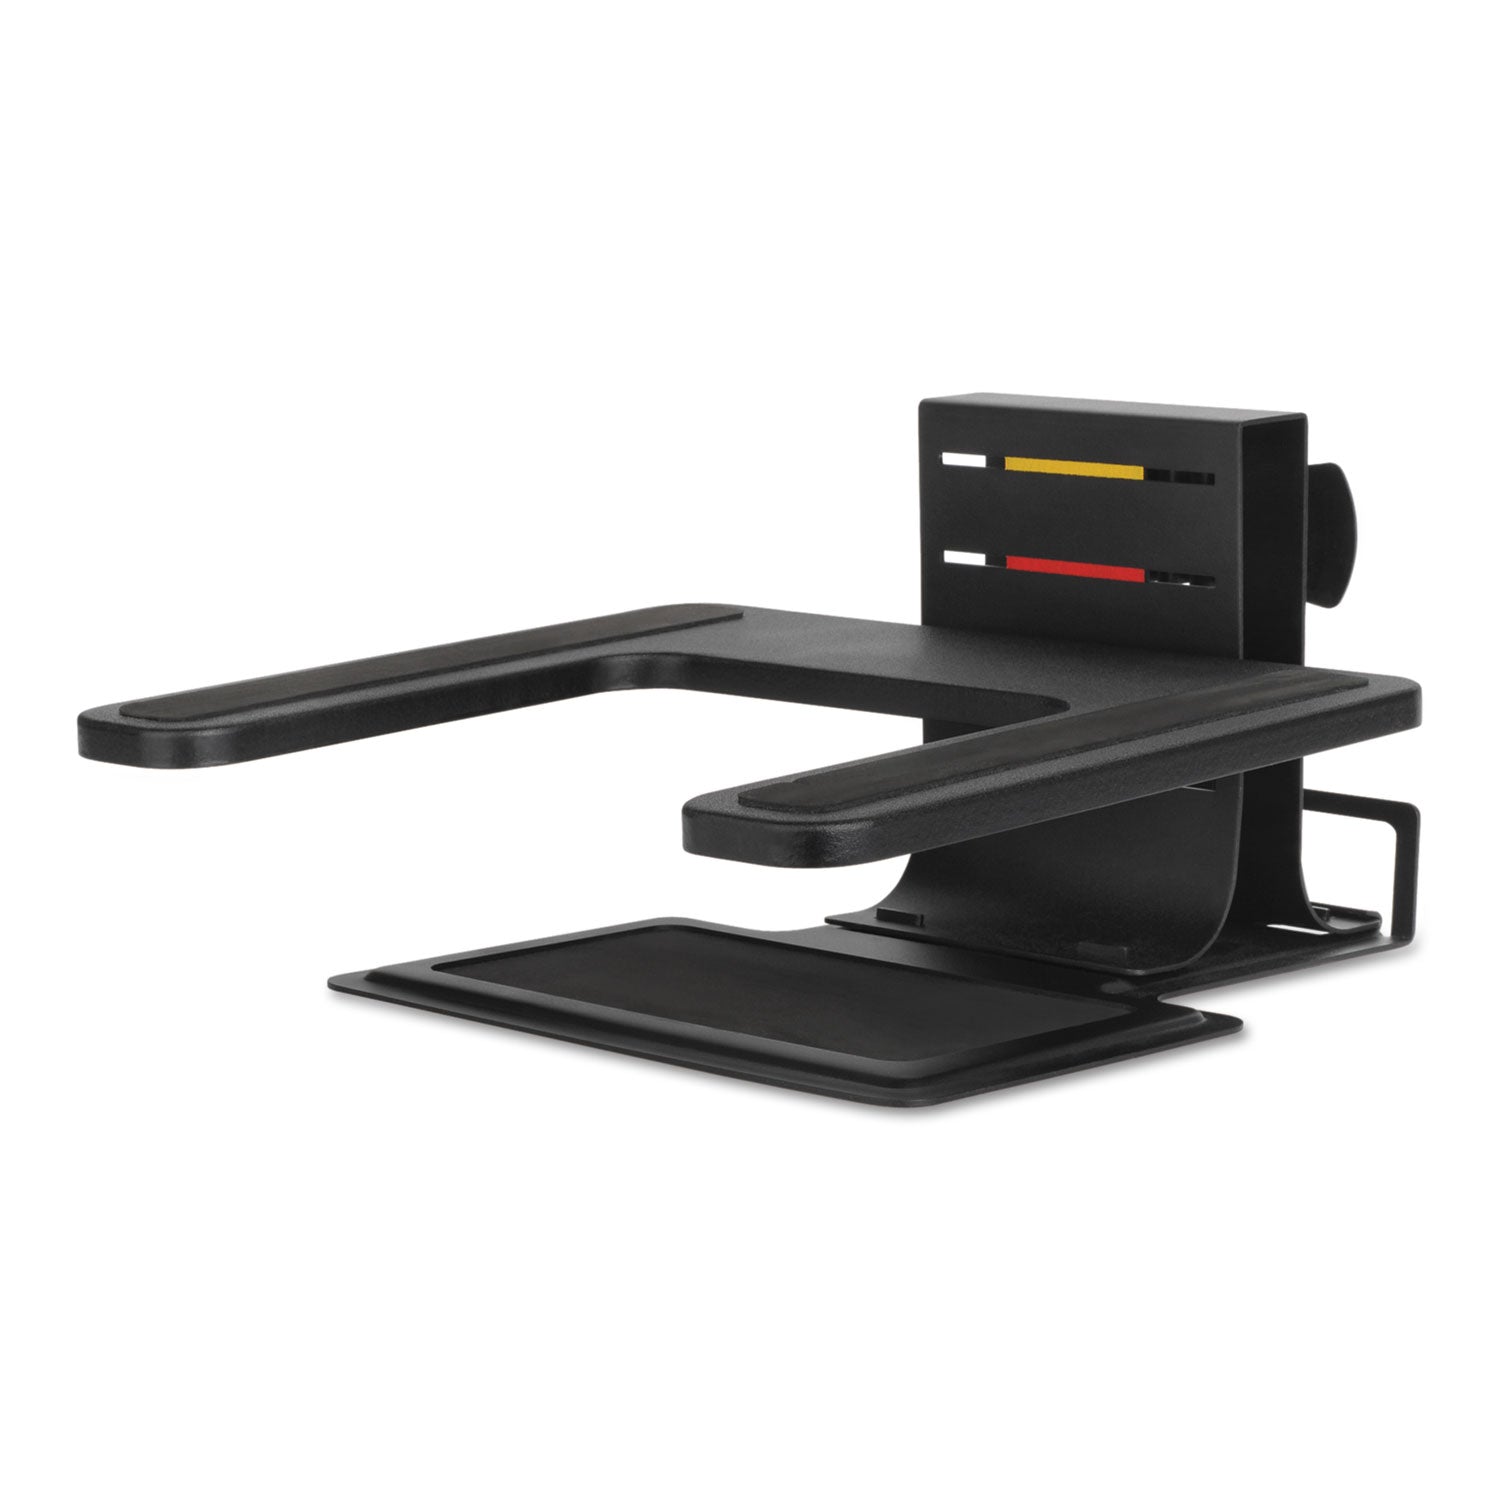 Adjustable Laptop Stand, 10" x 12.5" x 3" to 7", Black, Supports 7 lbs - 